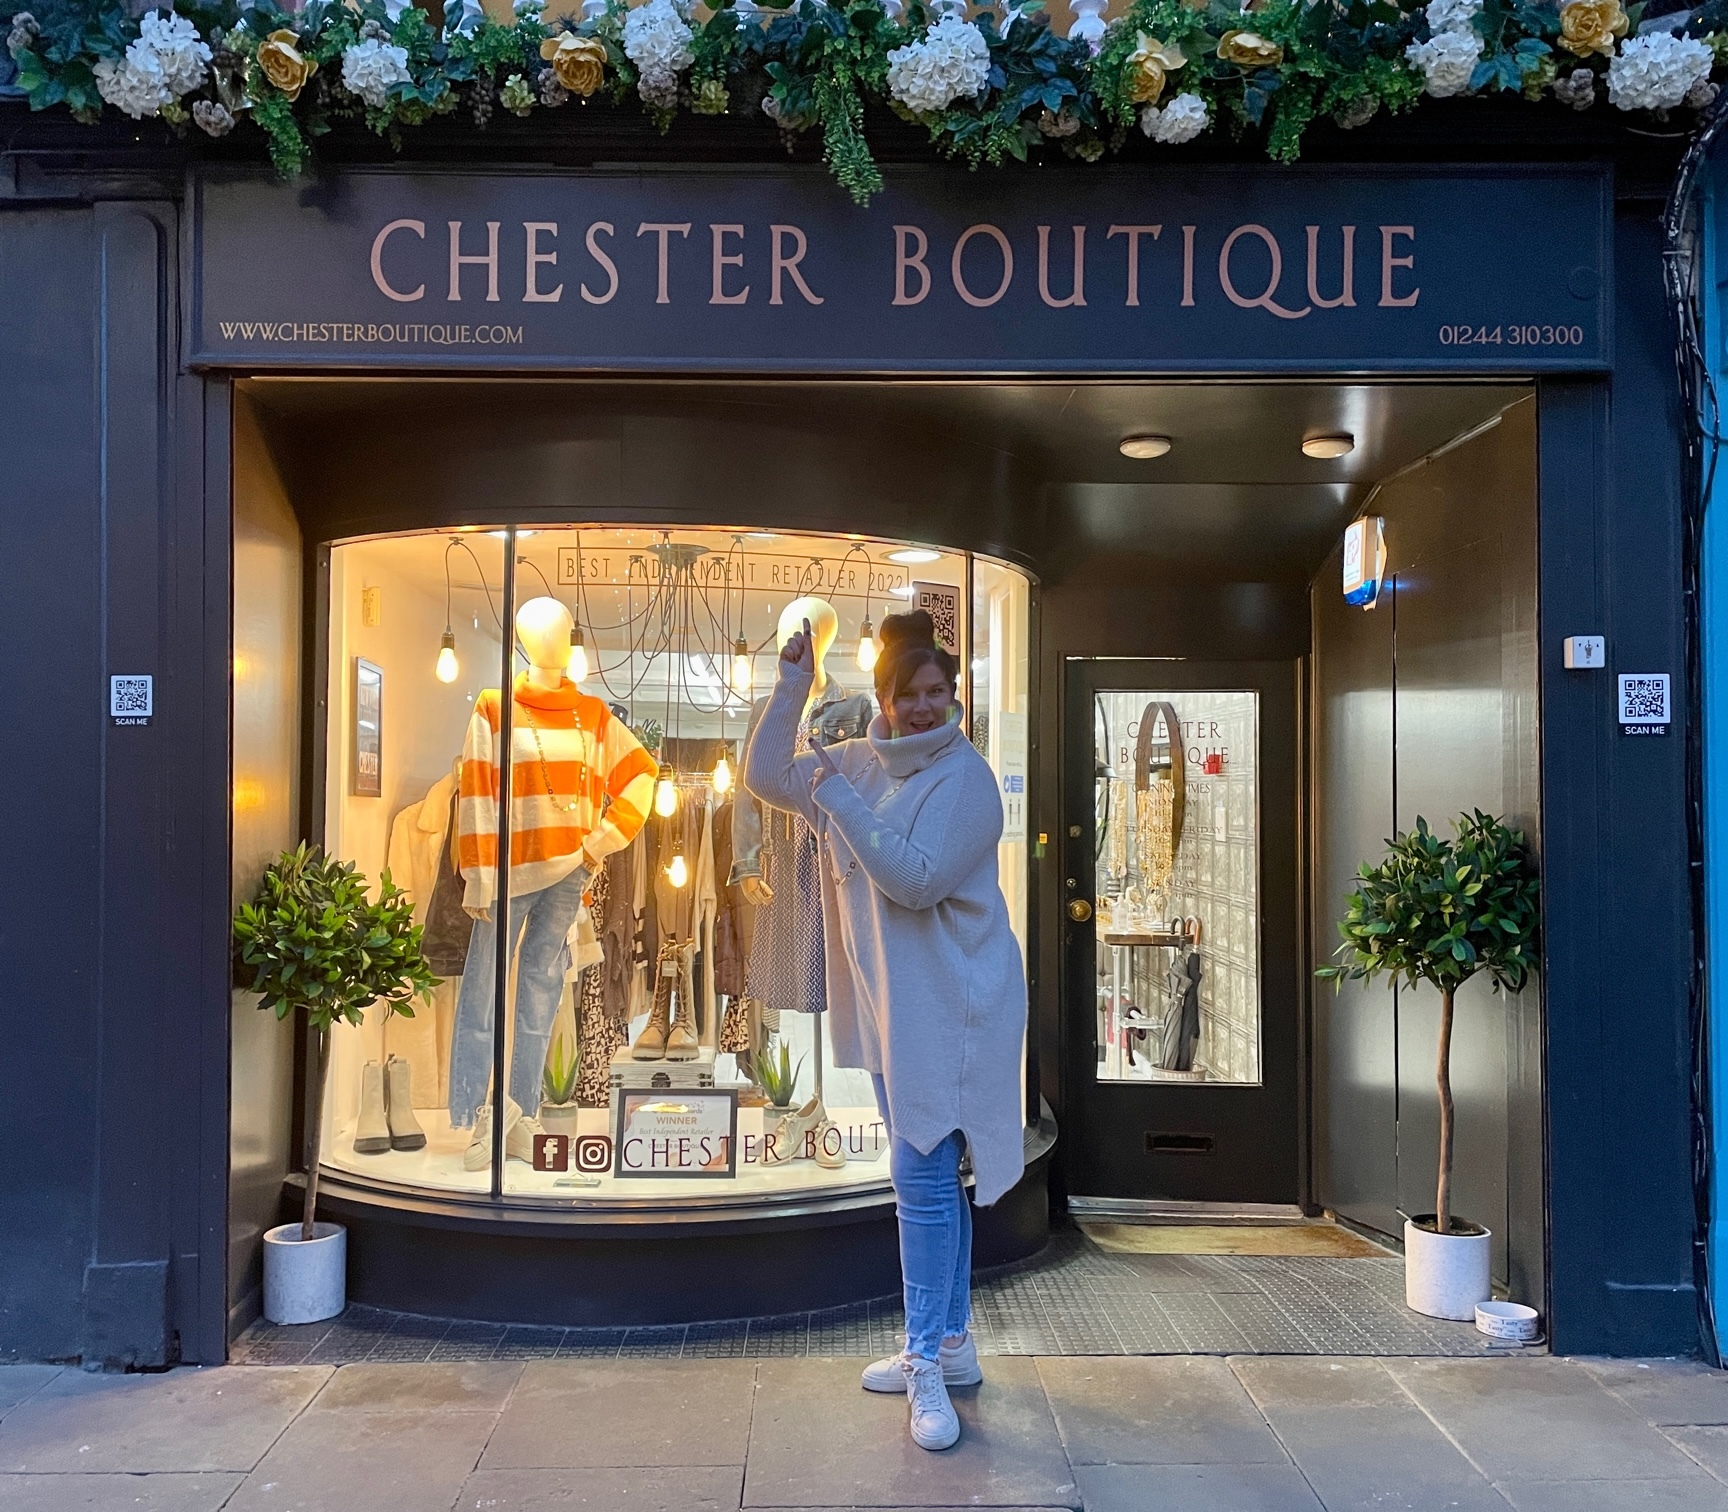 Chester Boutique is one of the venues where the Chester Gift Card can be used.